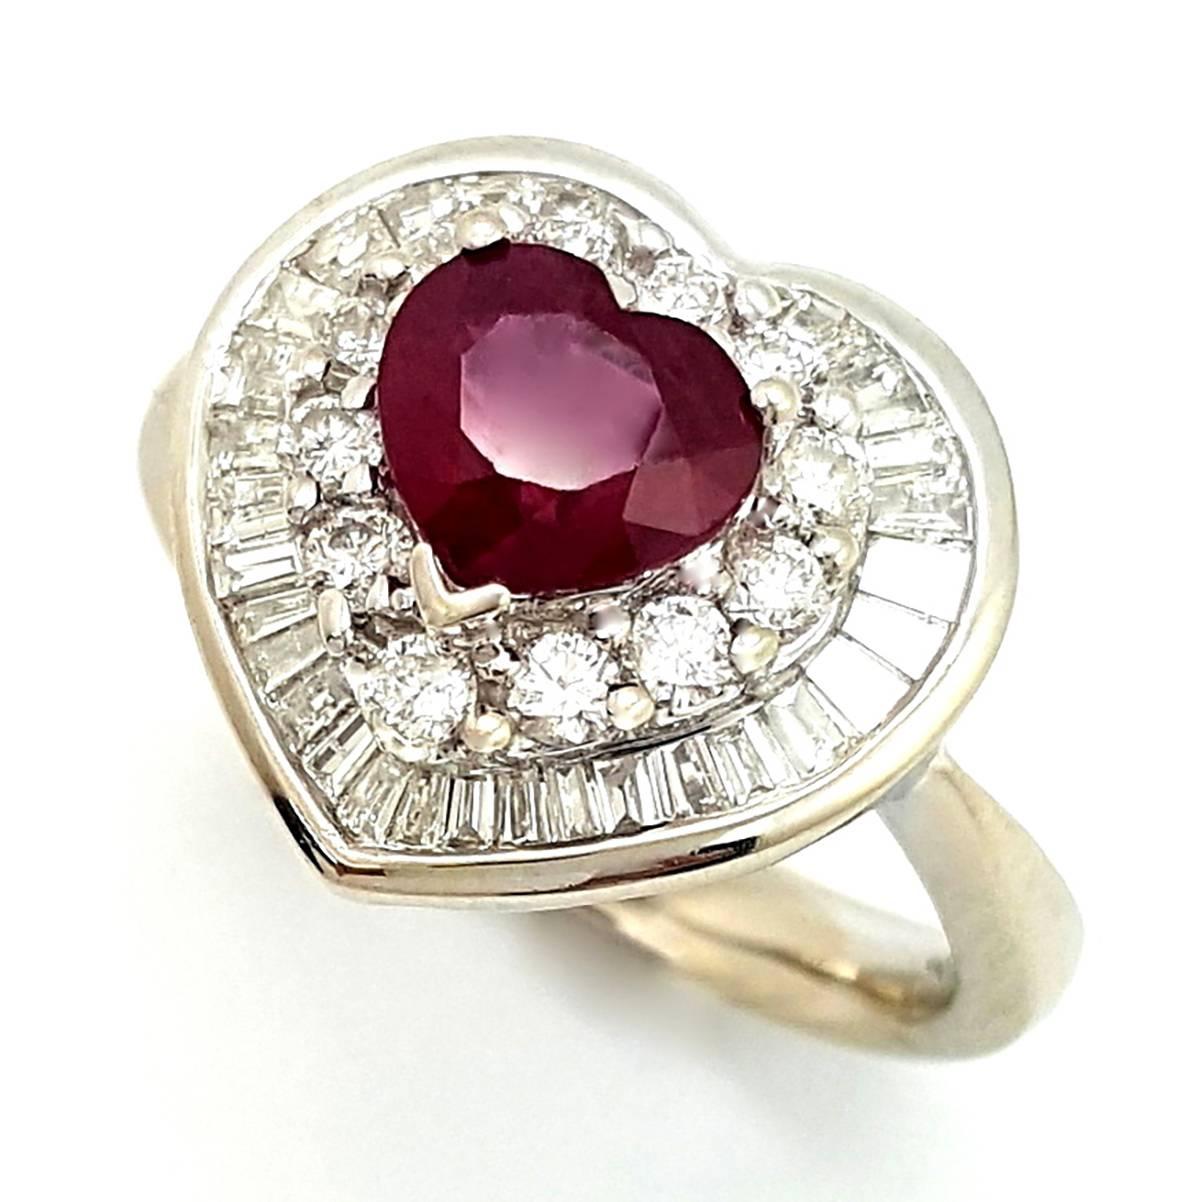 This 18k white gold diamond and ruby ring is simply amazing! The ring features a beautiful truly red 0.92ct heart cut ruby gemstone adorned with 1.32cts of diamonds. There are 12 round brilliant cut diamonds prong set in the first halo equaling